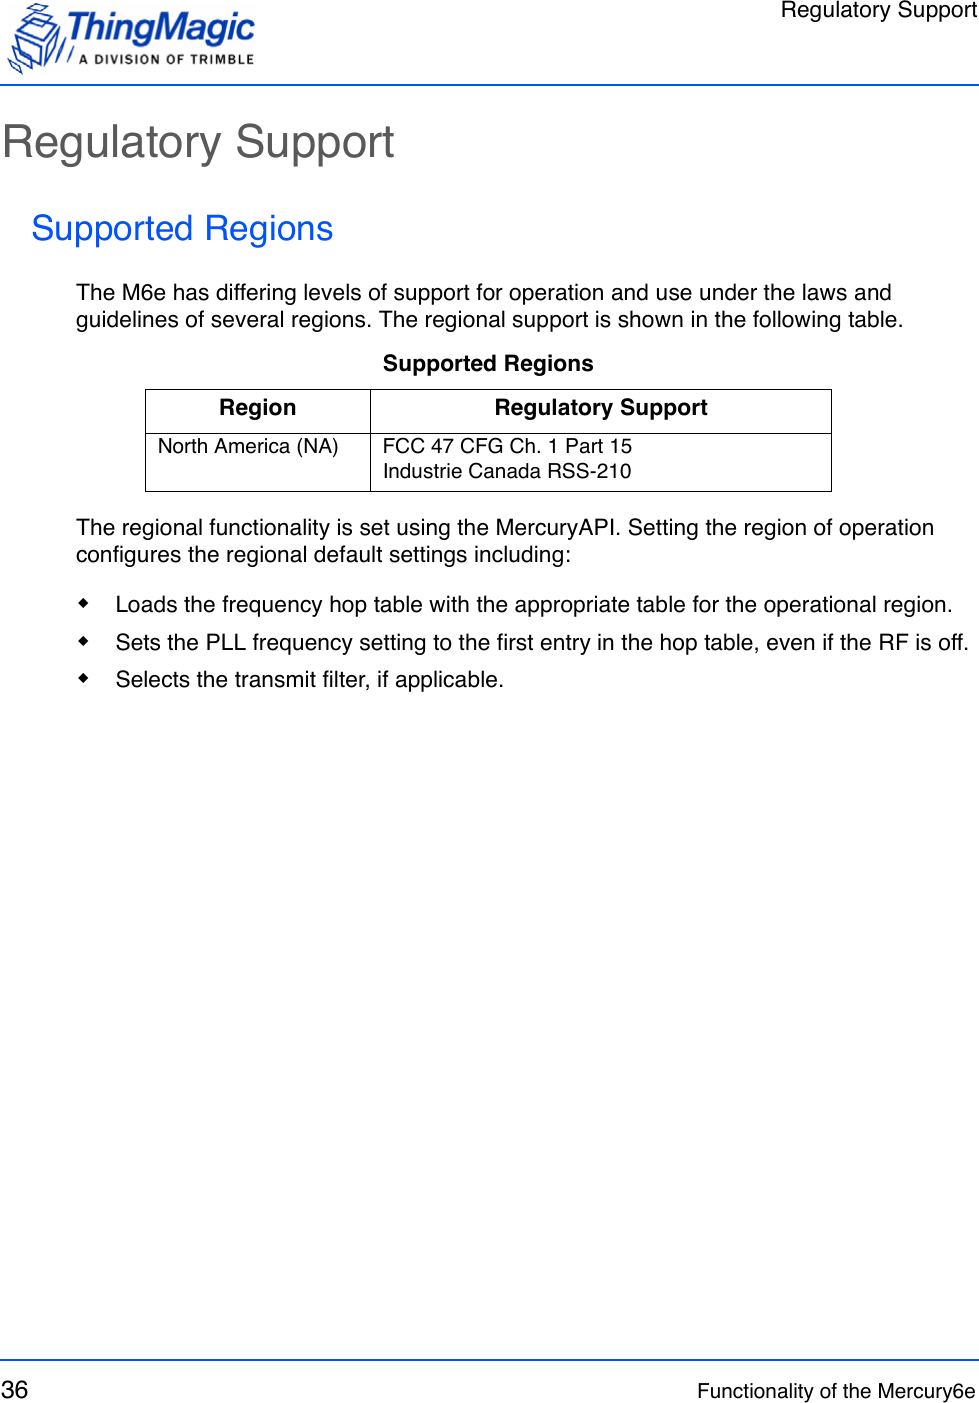 Regulatory Support36 Functionality of the Mercury6eRegulatory SupportSupported RegionsThe M6e has differing levels of support for operation and use under the laws and guidelines of several regions. The regional support is shown in the following table.The regional functionality is set using the MercuryAPI. Setting the region of operation configures the regional default settings including: Loads the frequency hop table with the appropriate table for the operational region. Sets the PLL frequency setting to the first entry in the hop table, even if the RF is off. Selects the transmit filter, if applicable.Supported RegionsRegion Regulatory SupportNorth America (NA) FCC 47 CFG Ch. 1 Part 15Industrie Canada RSS-210